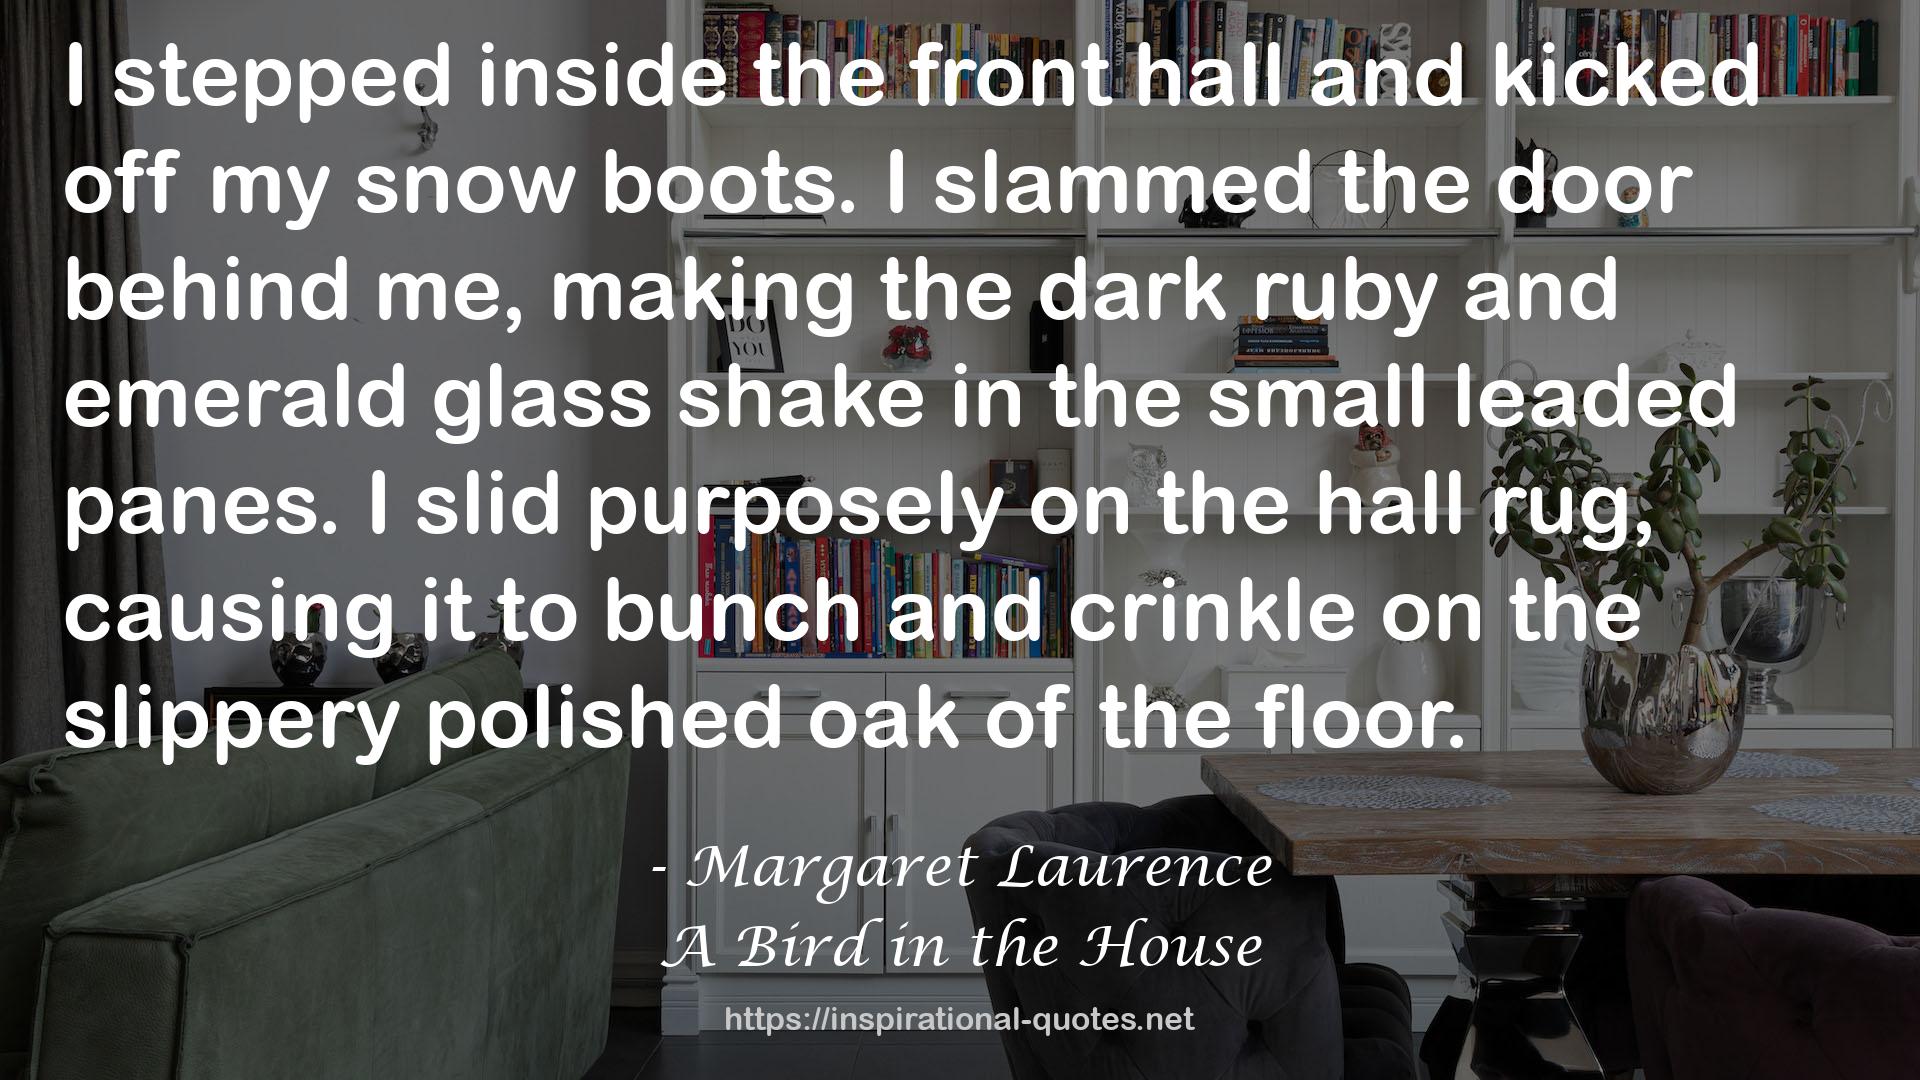 Margaret Laurence QUOTES